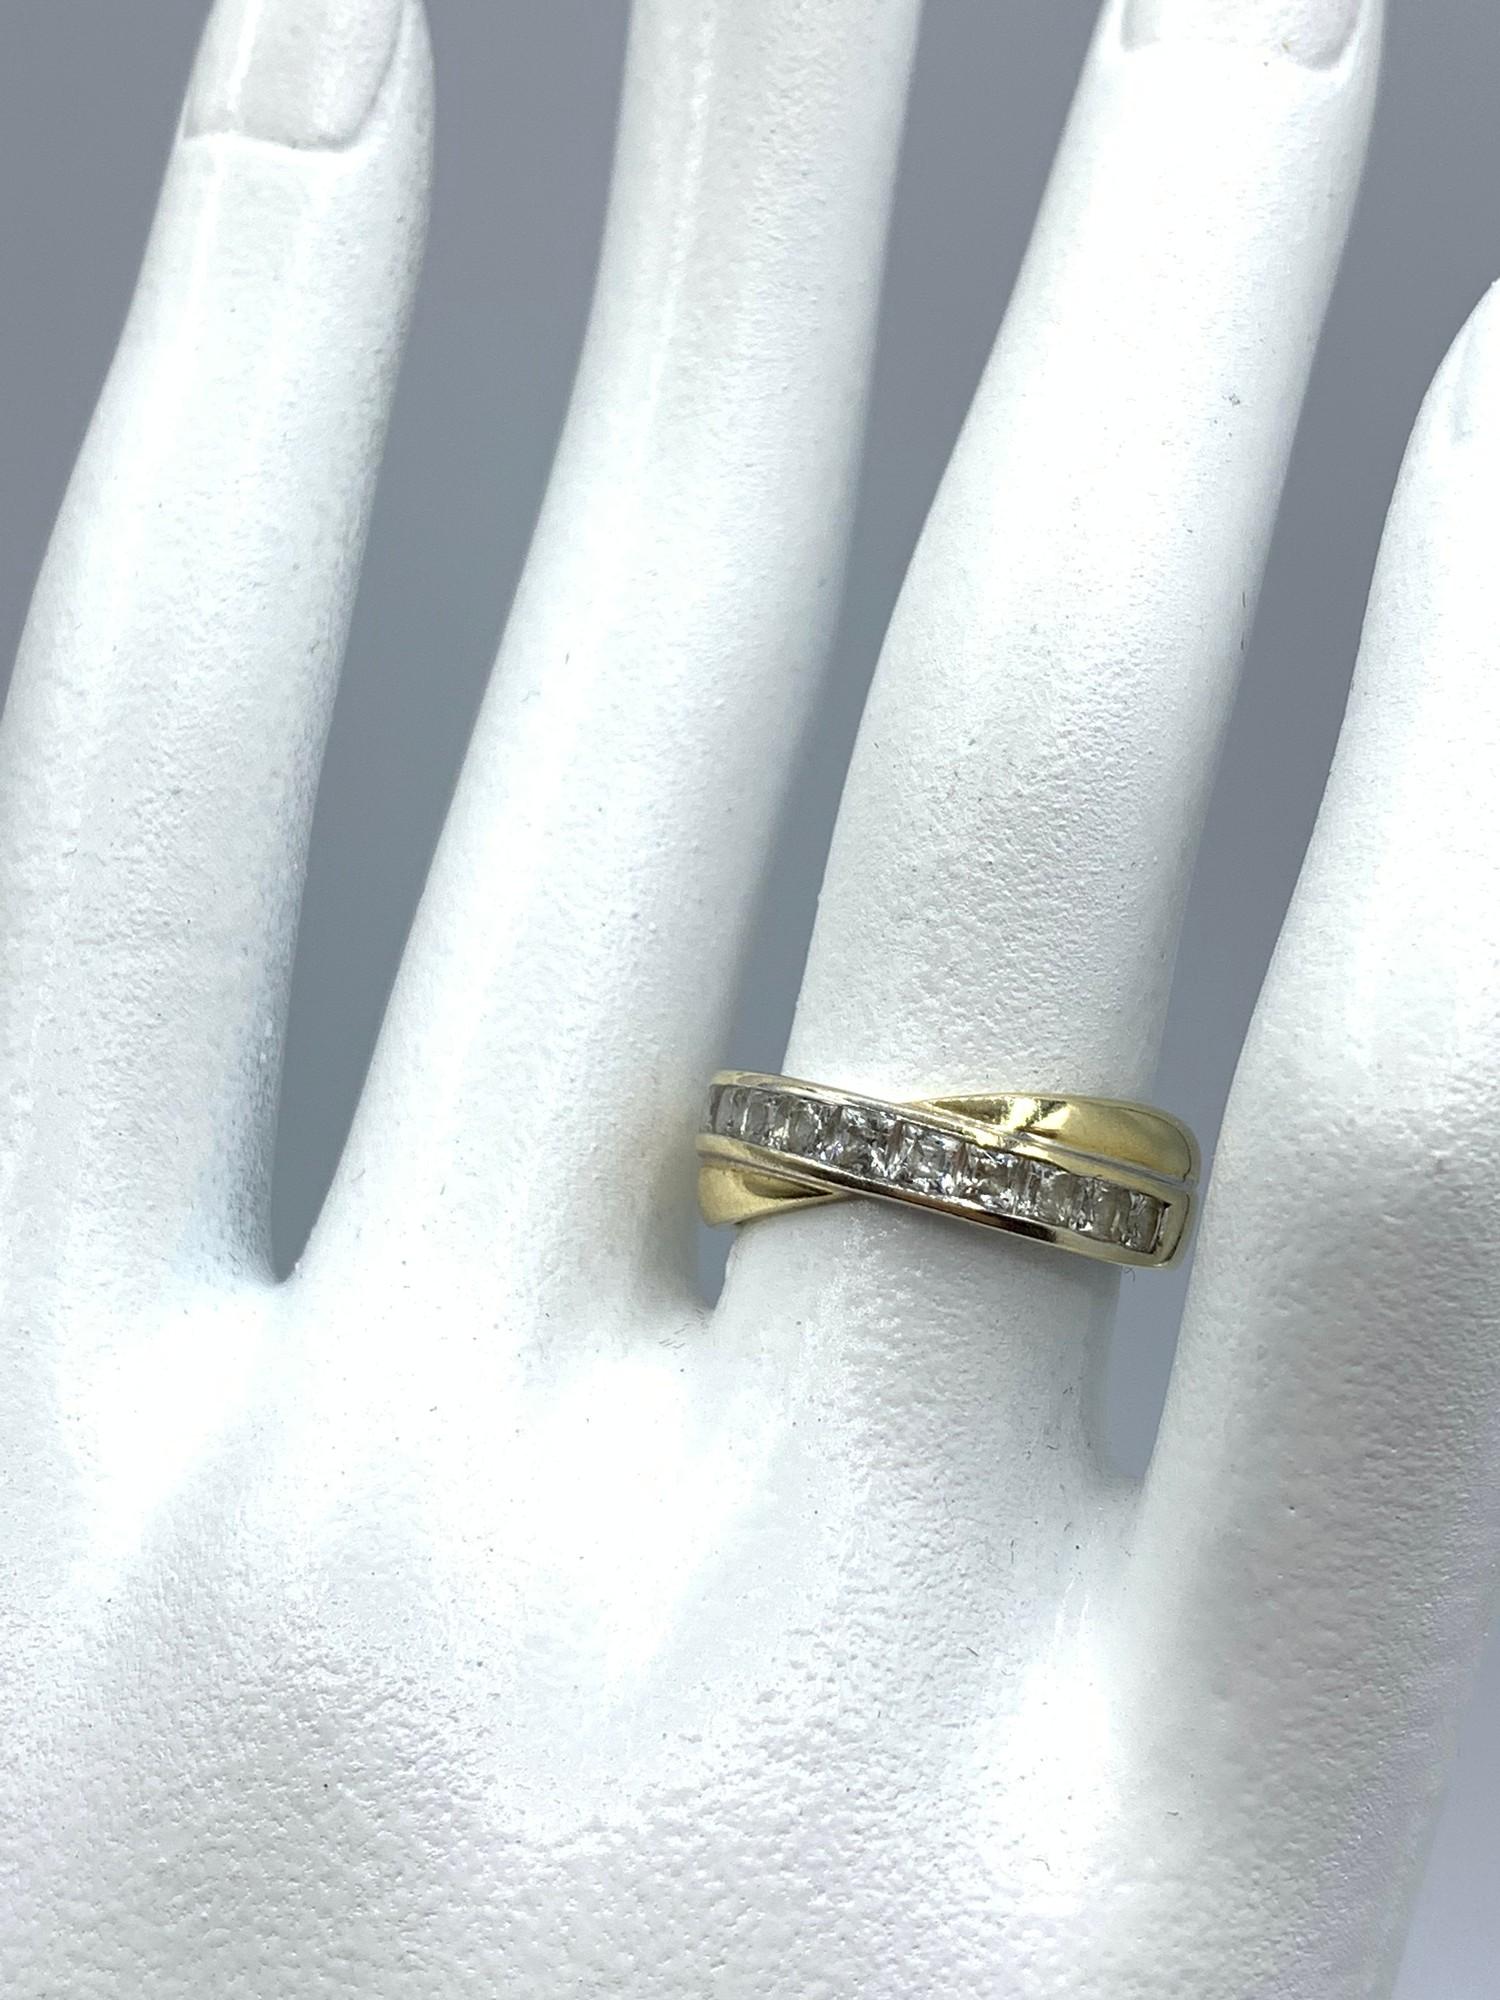 9ct yellow gold crossover ring, size K-L. - Image 6 of 6